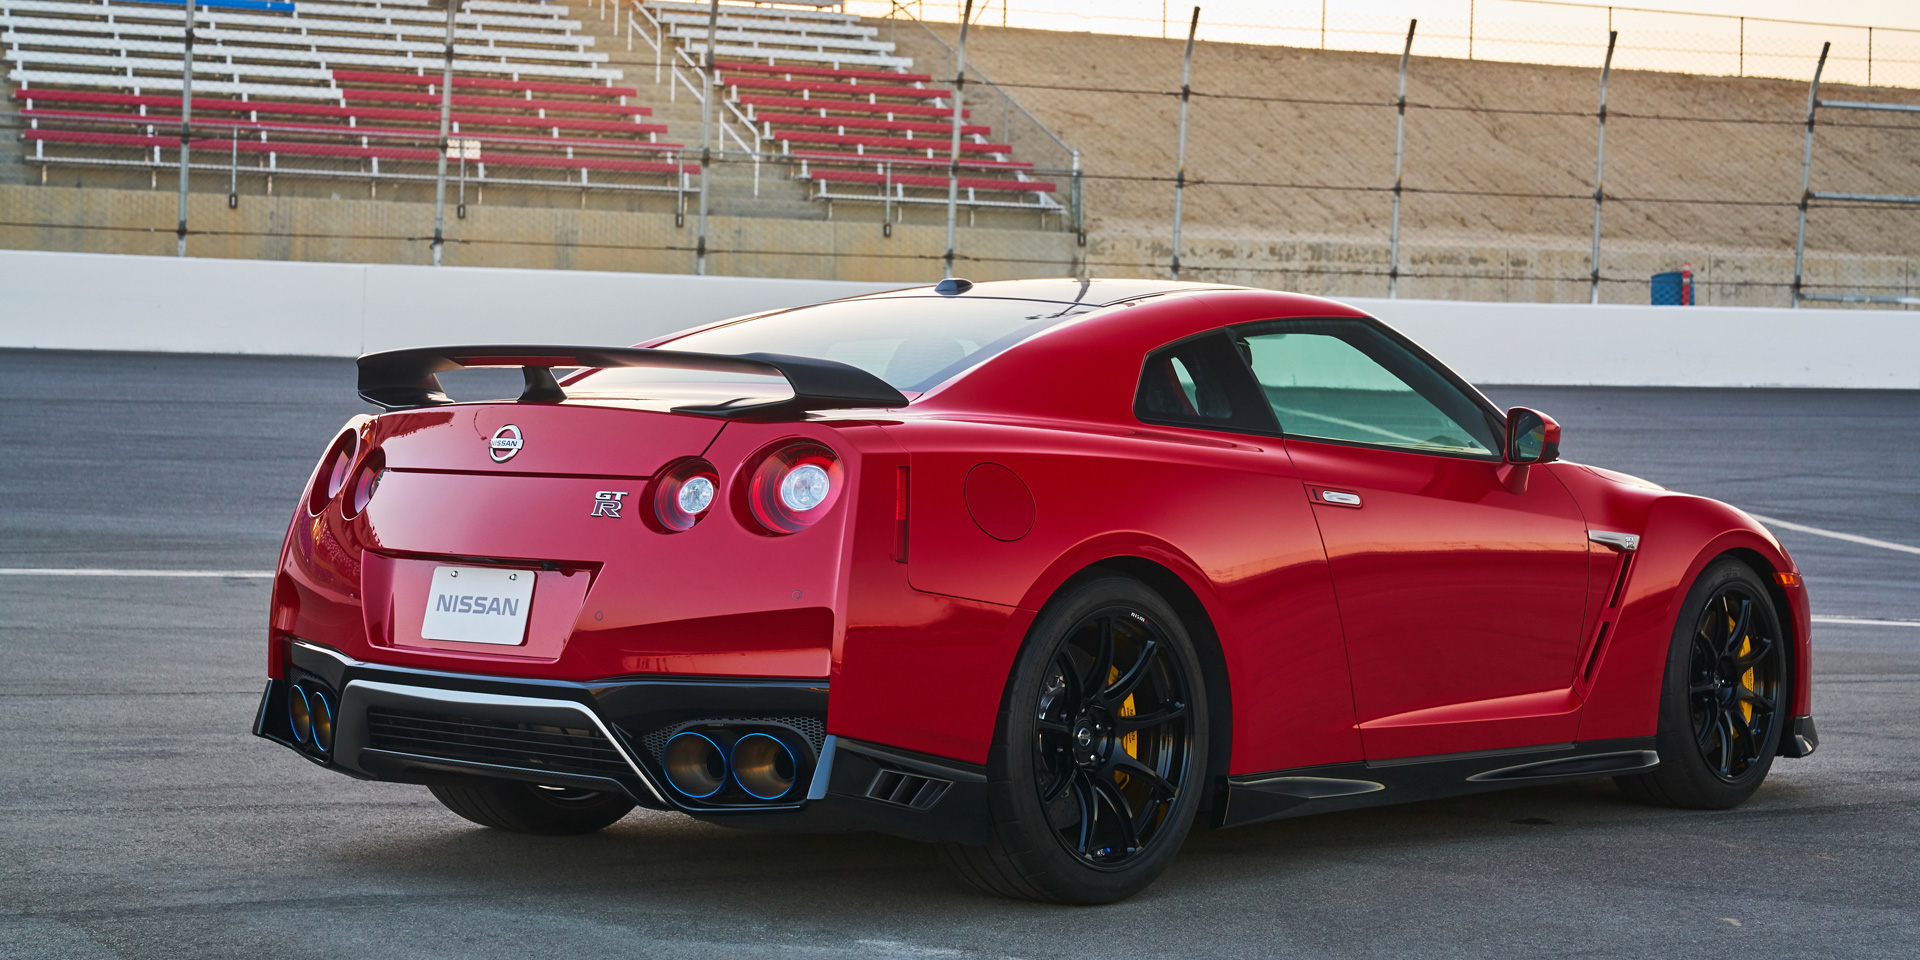 2020 Nissan GTR Vehicles on Display Chicago Auto Show